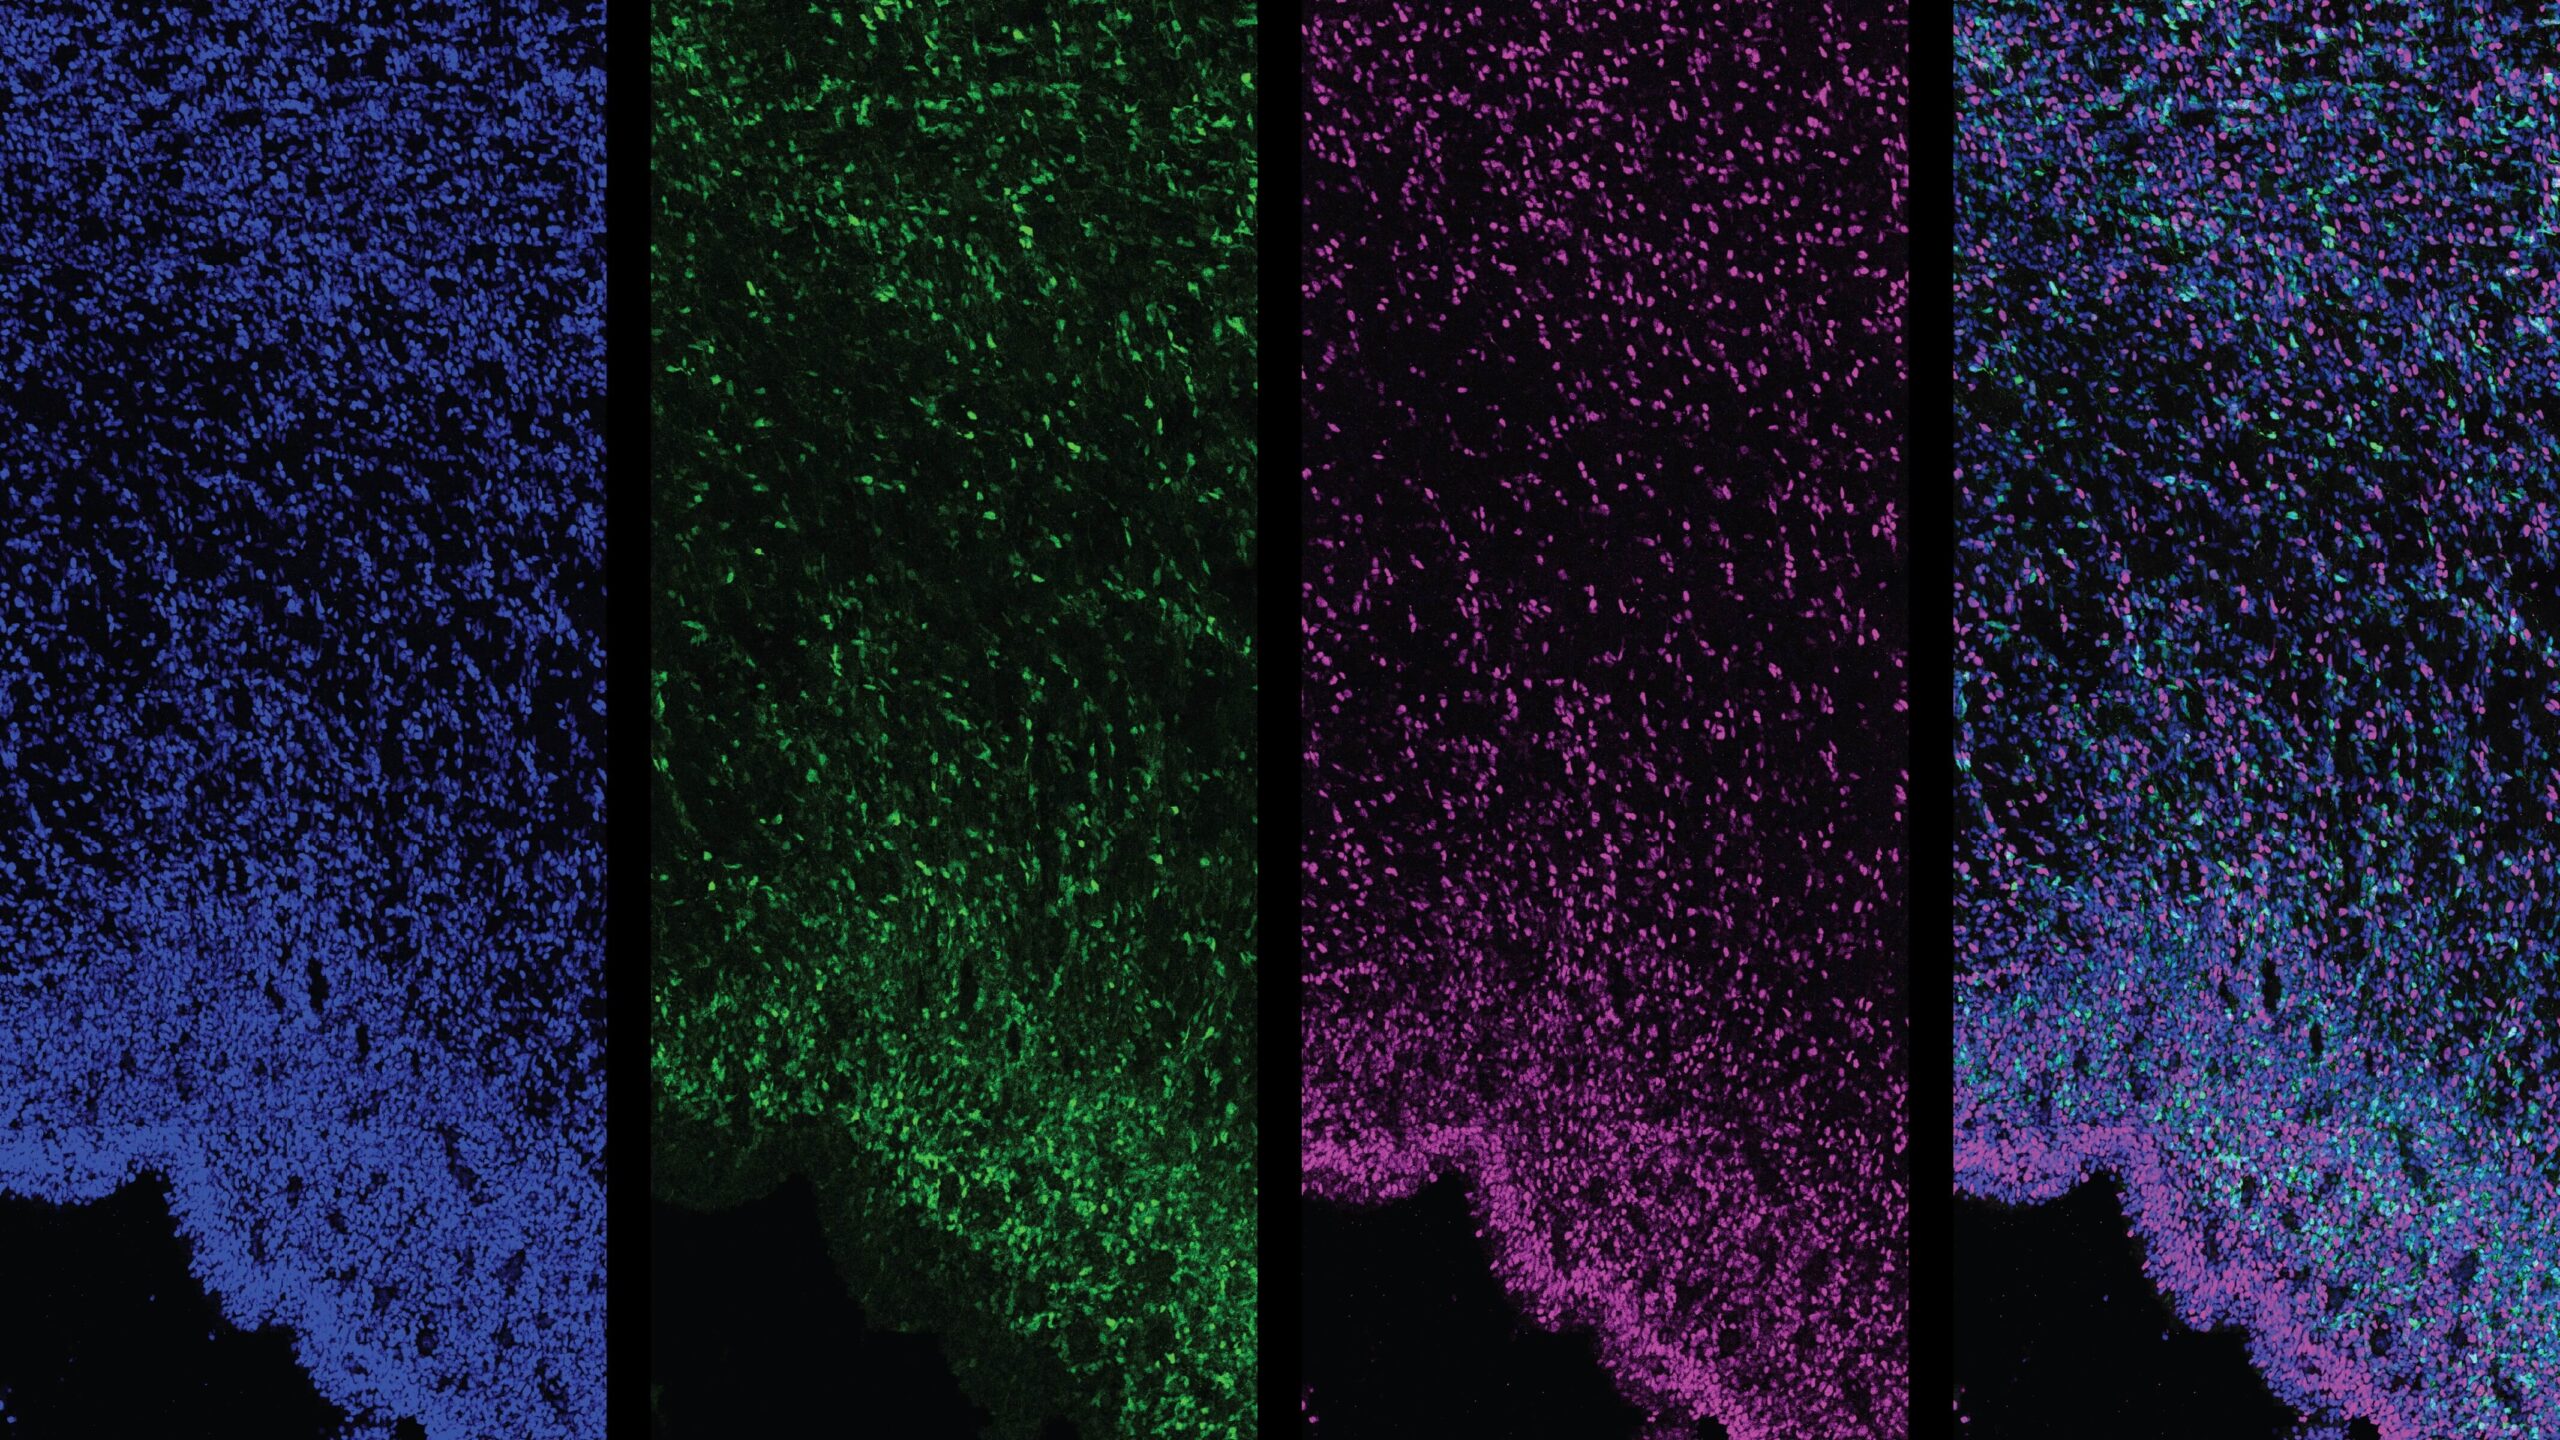 The scientists found that PPP1R17 is expressed in the part of the developing human brain known as the cerebral cortex (PPP1R17 is shown in green in the second panel from the left, all panels show a developing human brain) but not in developing mouse or ferret cerebral cortex. Image courtesy of Ellen DeGennaro/MIT and Harvard.